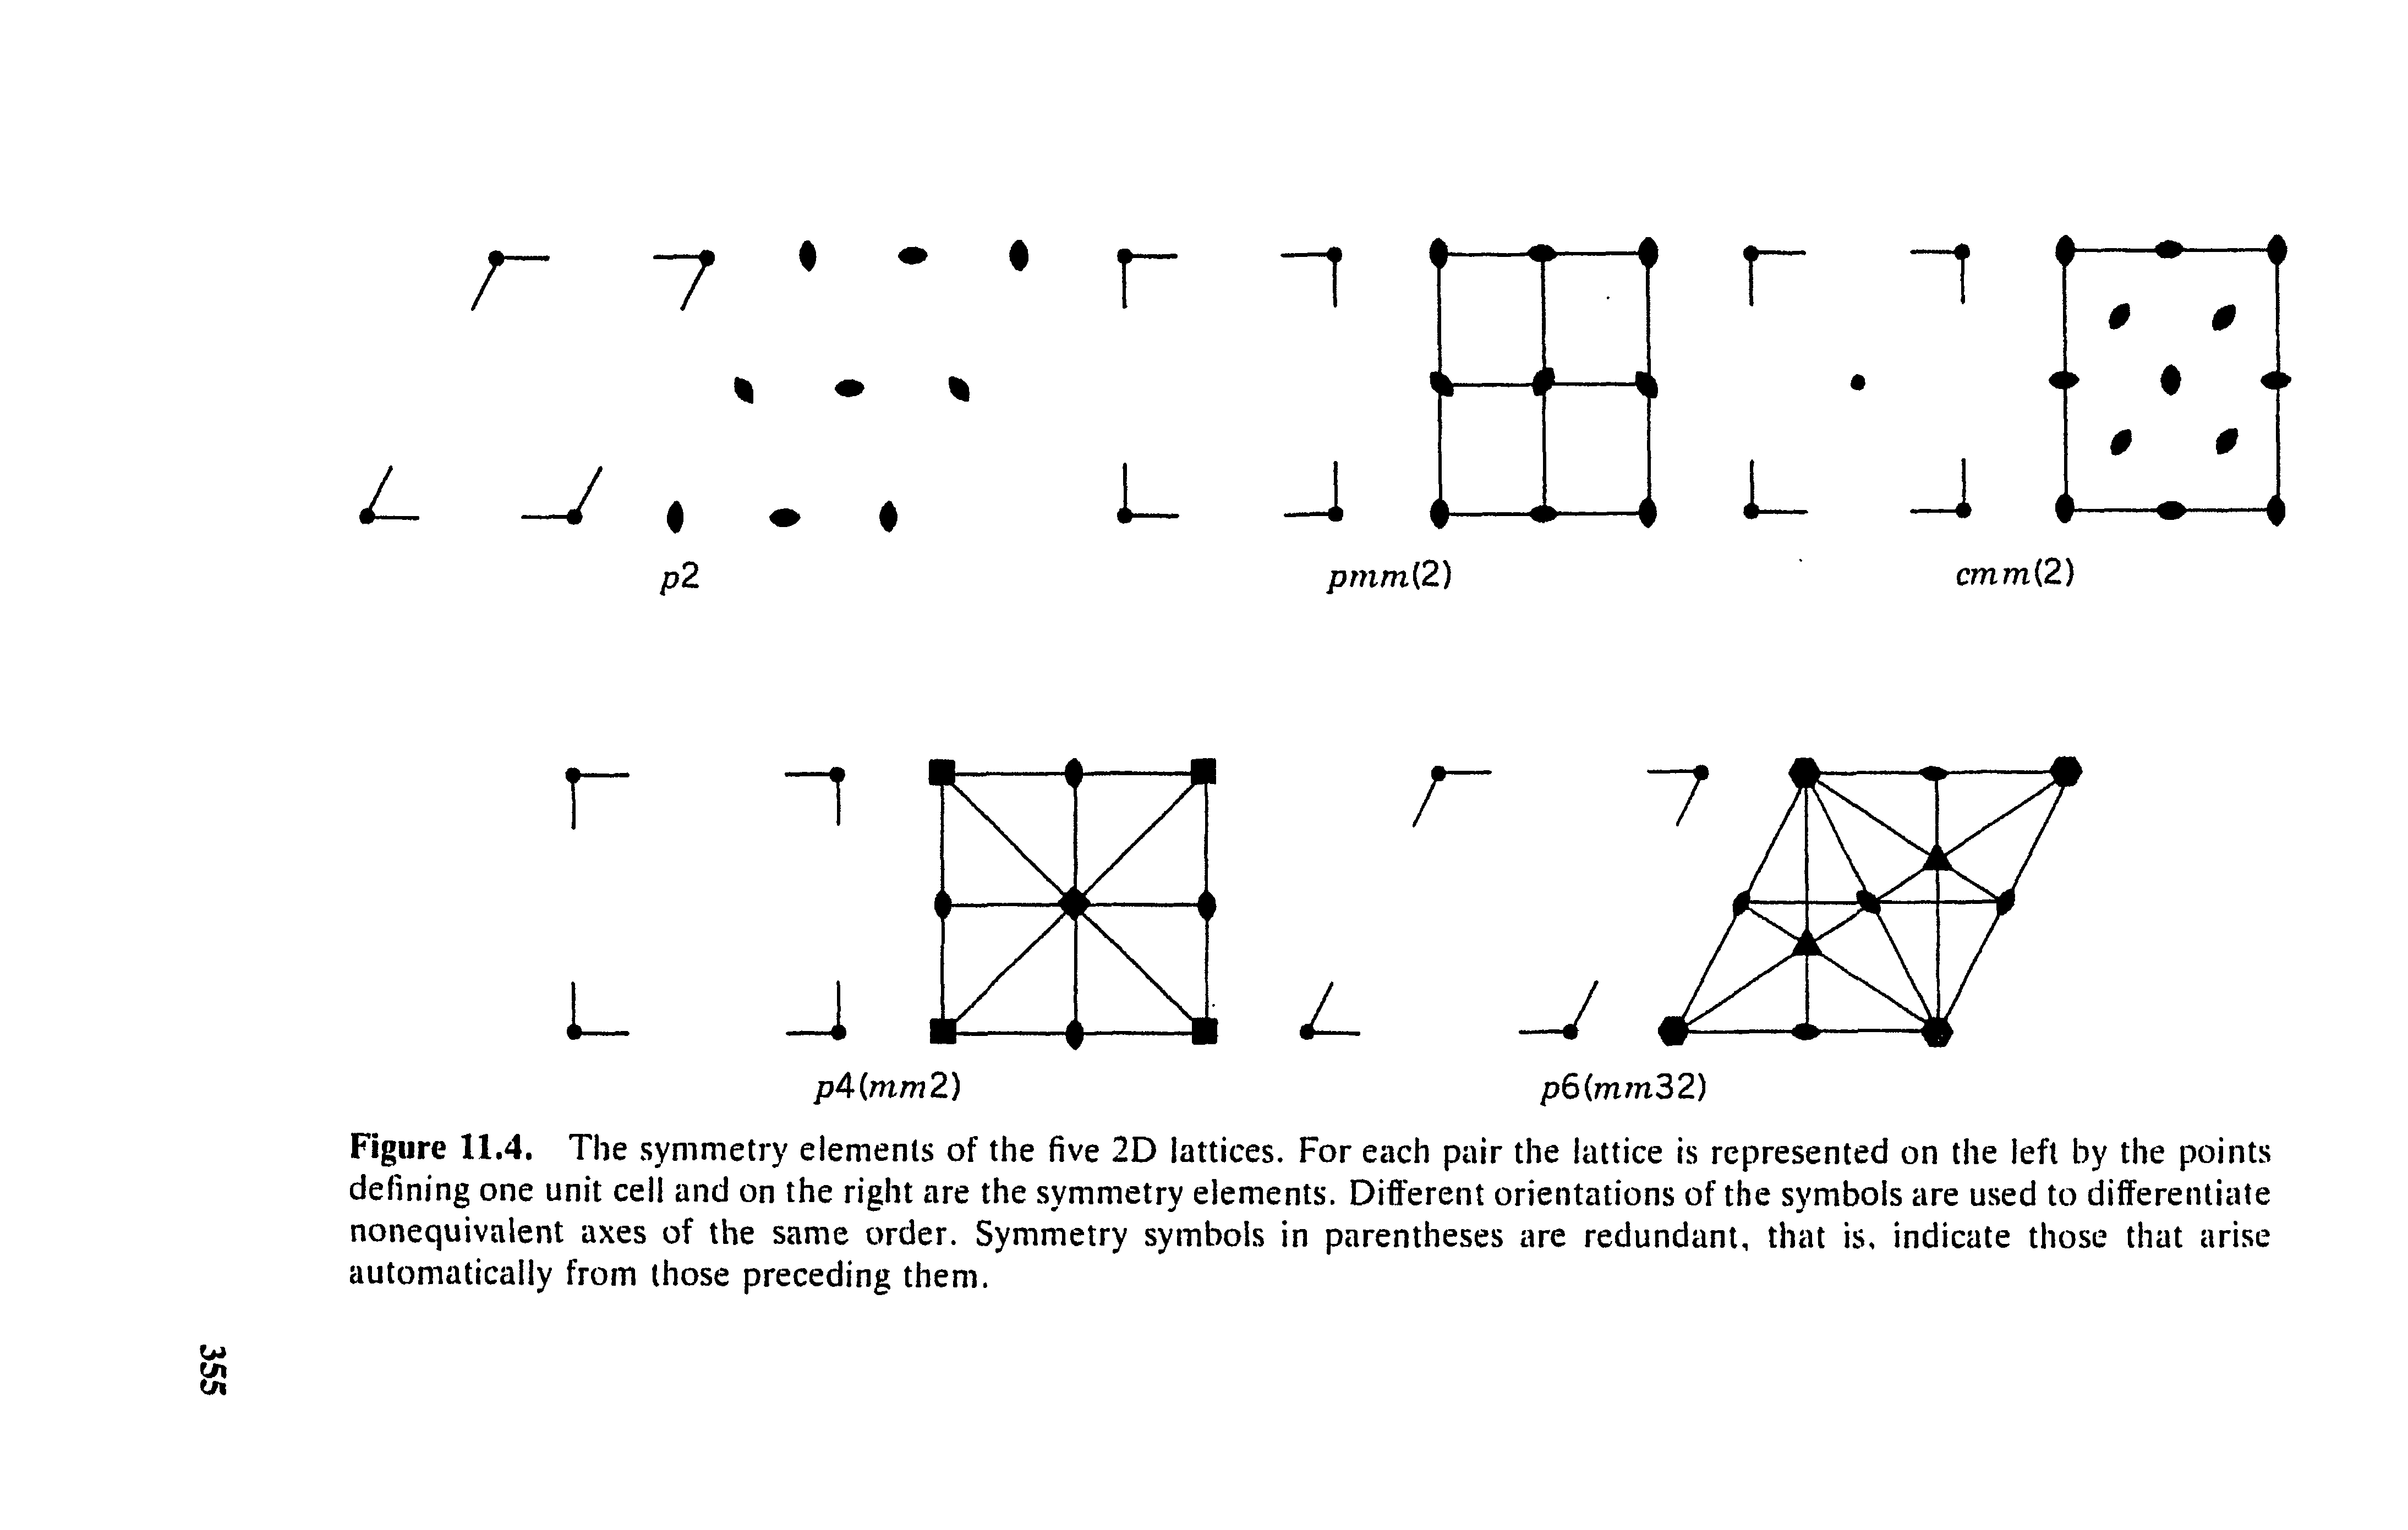 Figure 11.4. The symmetry elements of the five 2D lattices. For each pair the lattice is represented on the left by the points defining one unit cell and on the right are the symmetry elements. Different orientations of the symbols are used to differentiate nonequivalent axes of the same order. Symmetry symbols in parentheses are redundant, that is, indicate those that arise automatically from those preceding them.